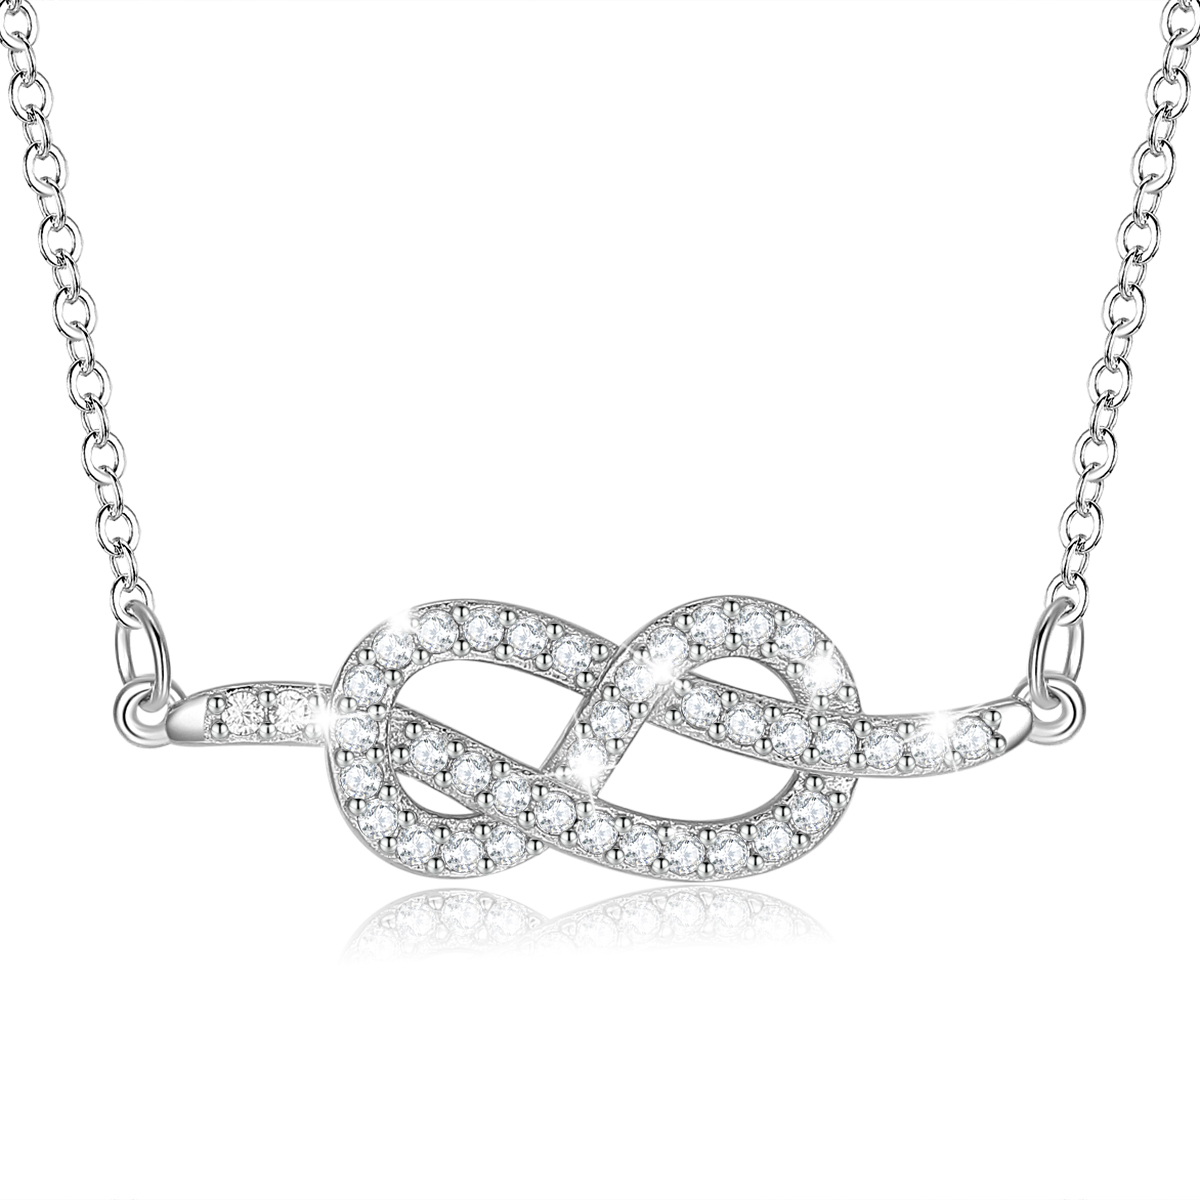 Merryshine Jewelry S925 Sterling Silver Cubic Zirconia Dainty Infinity Knot Necklace